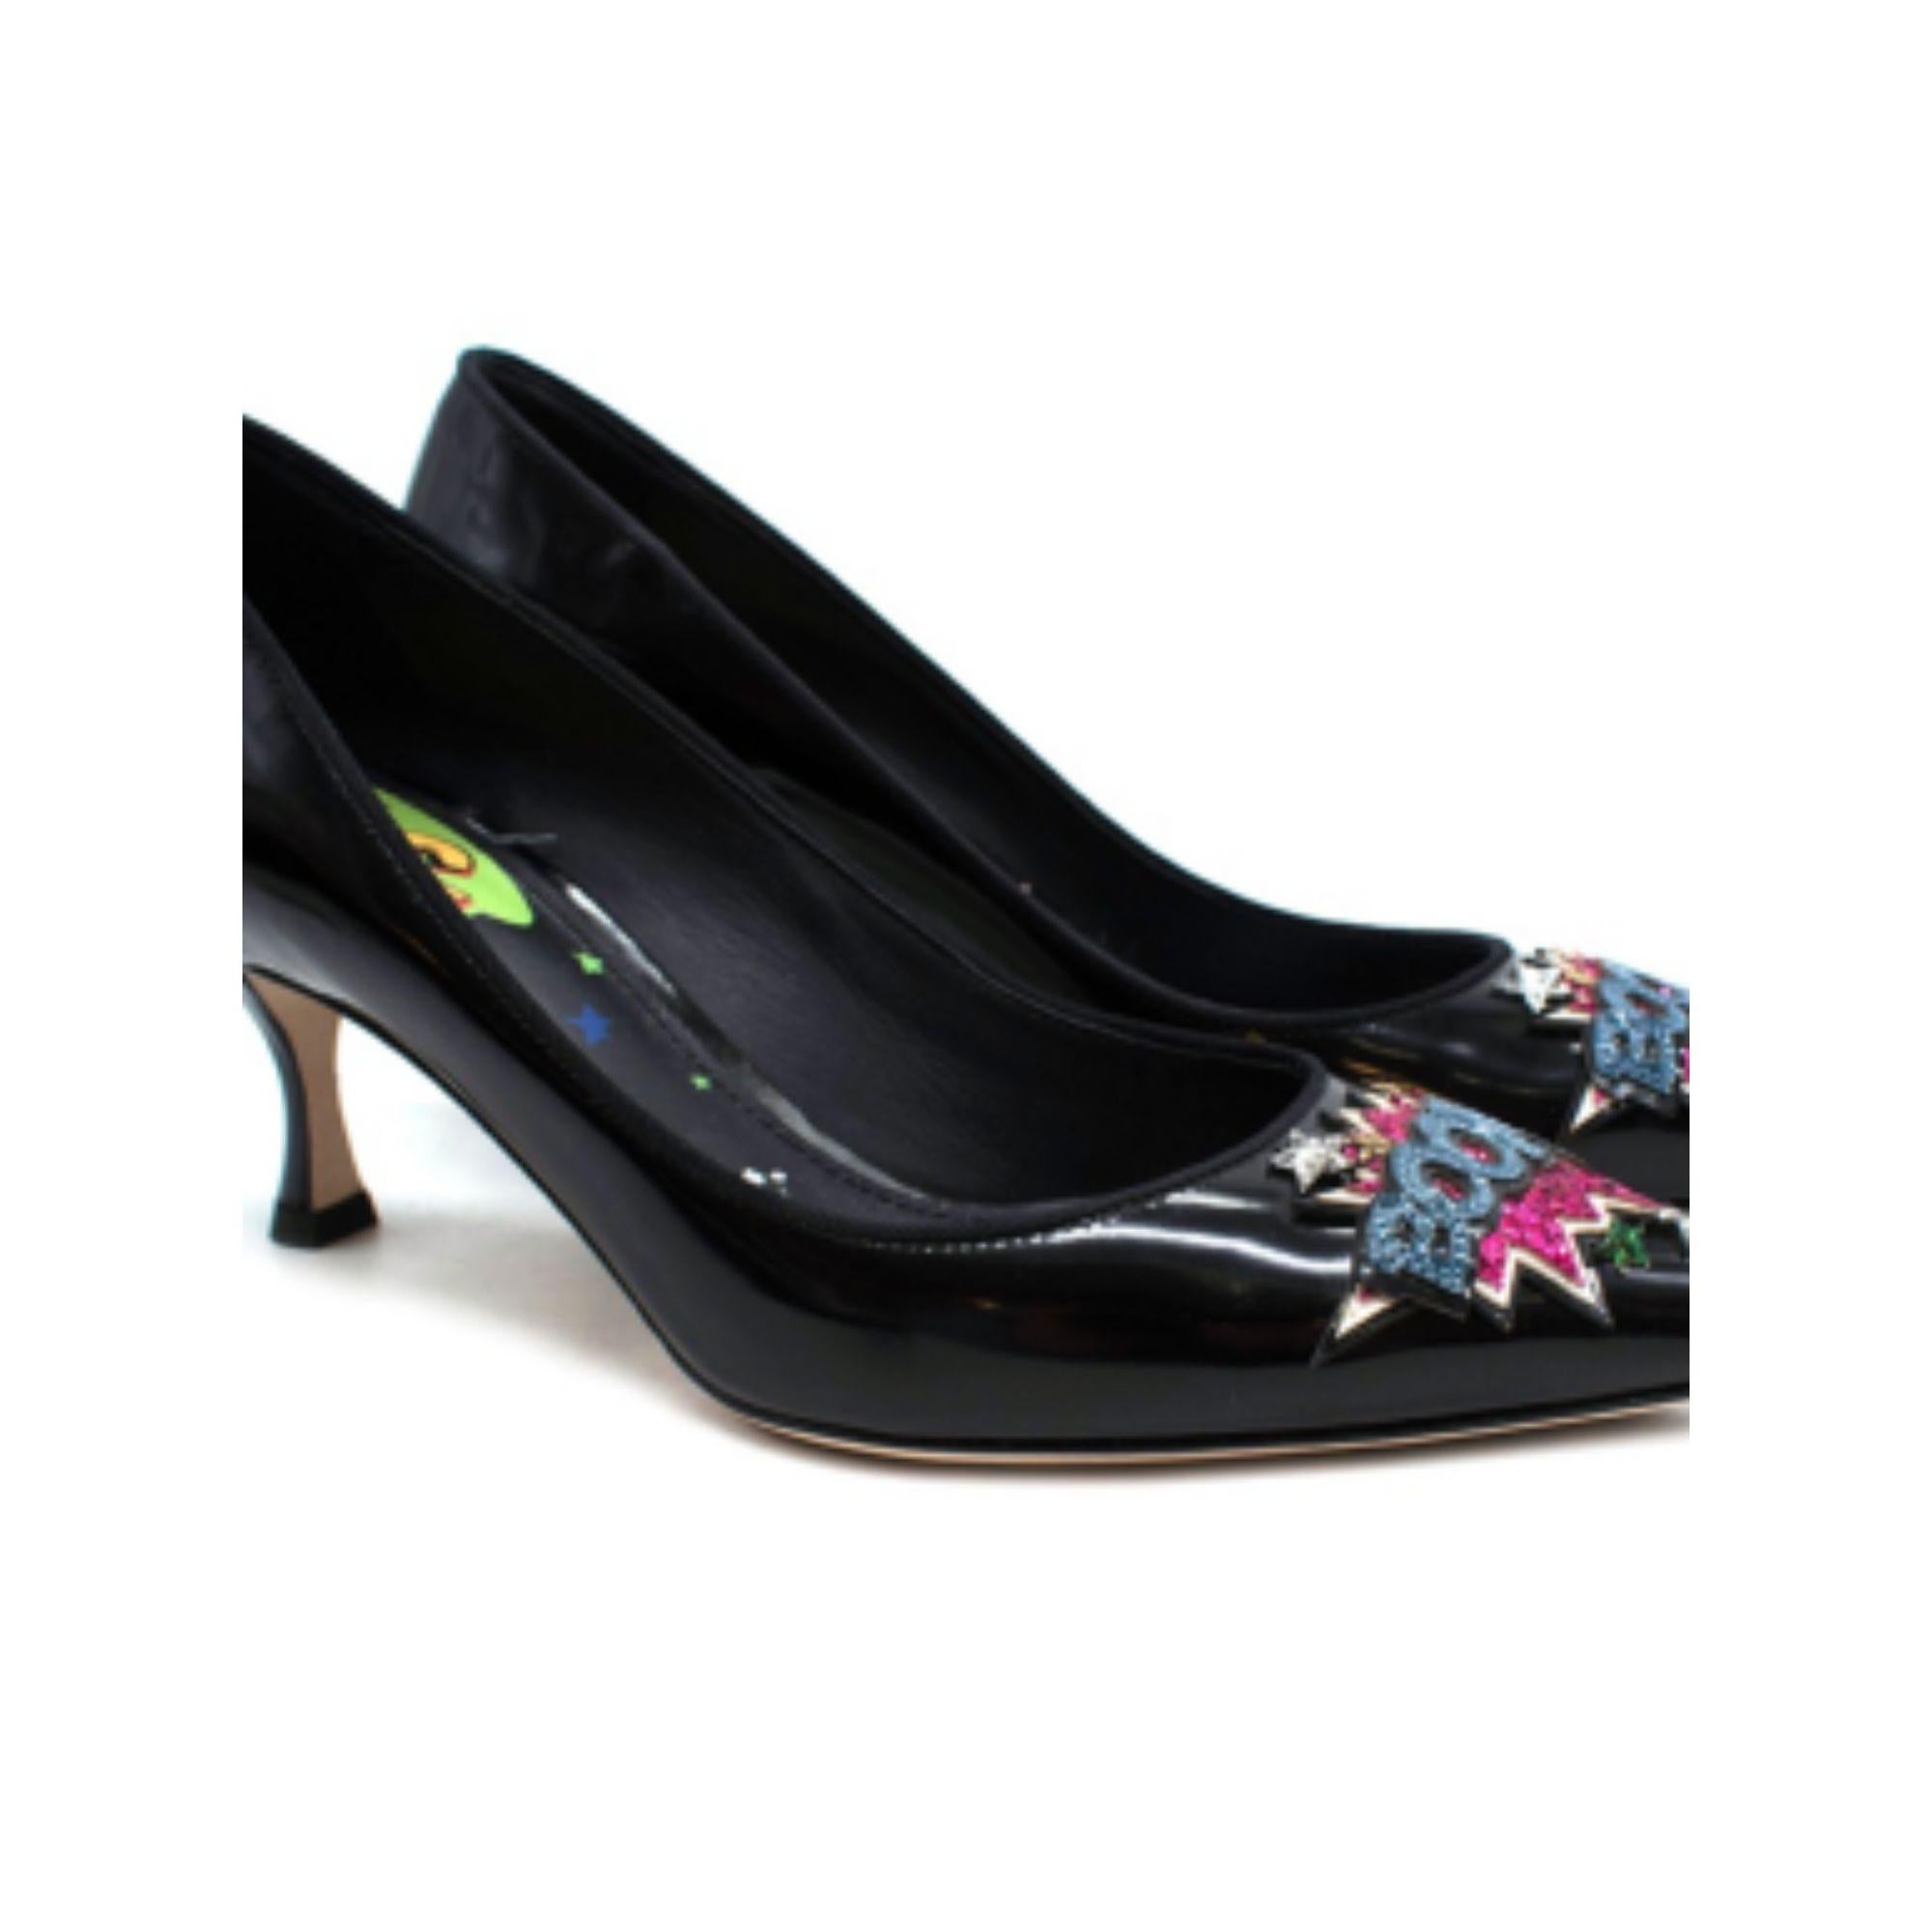 Dolce & Gabbana Black Patent Comic Embellished Pumps

- Black patent-leather Dolce & Gabbana heels with comic-strip style patch on toe
- Sequin, multi-colour 'Boom' patch and graffiti prints on inner sole
- Pointed-toe